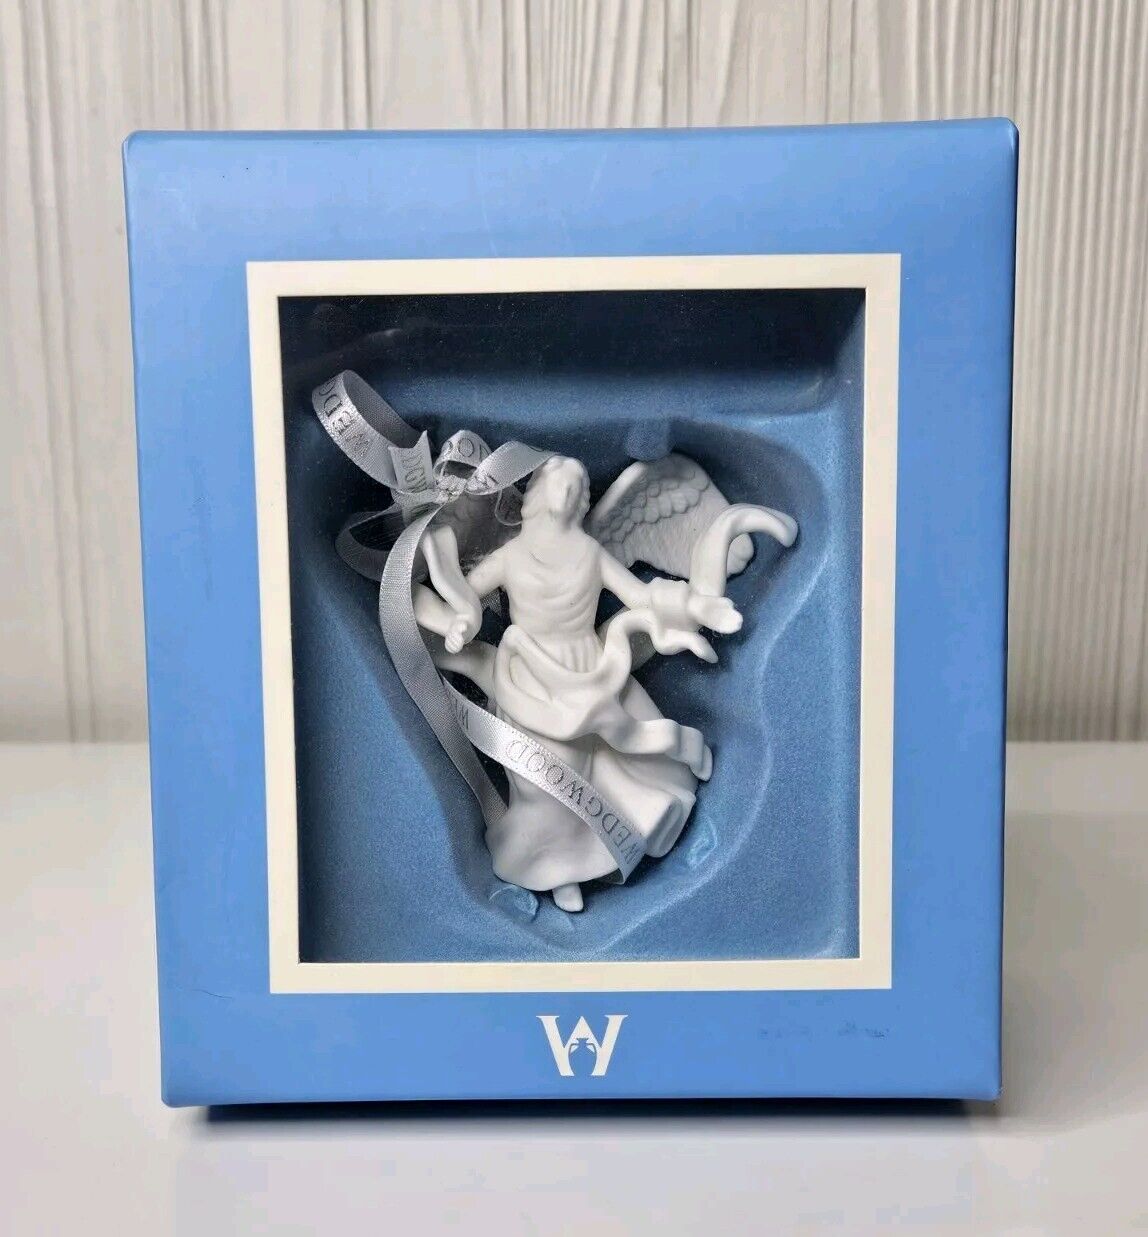 Wedgwood White Angel Christmas Ornament in Box 2009 Holiday Collectible